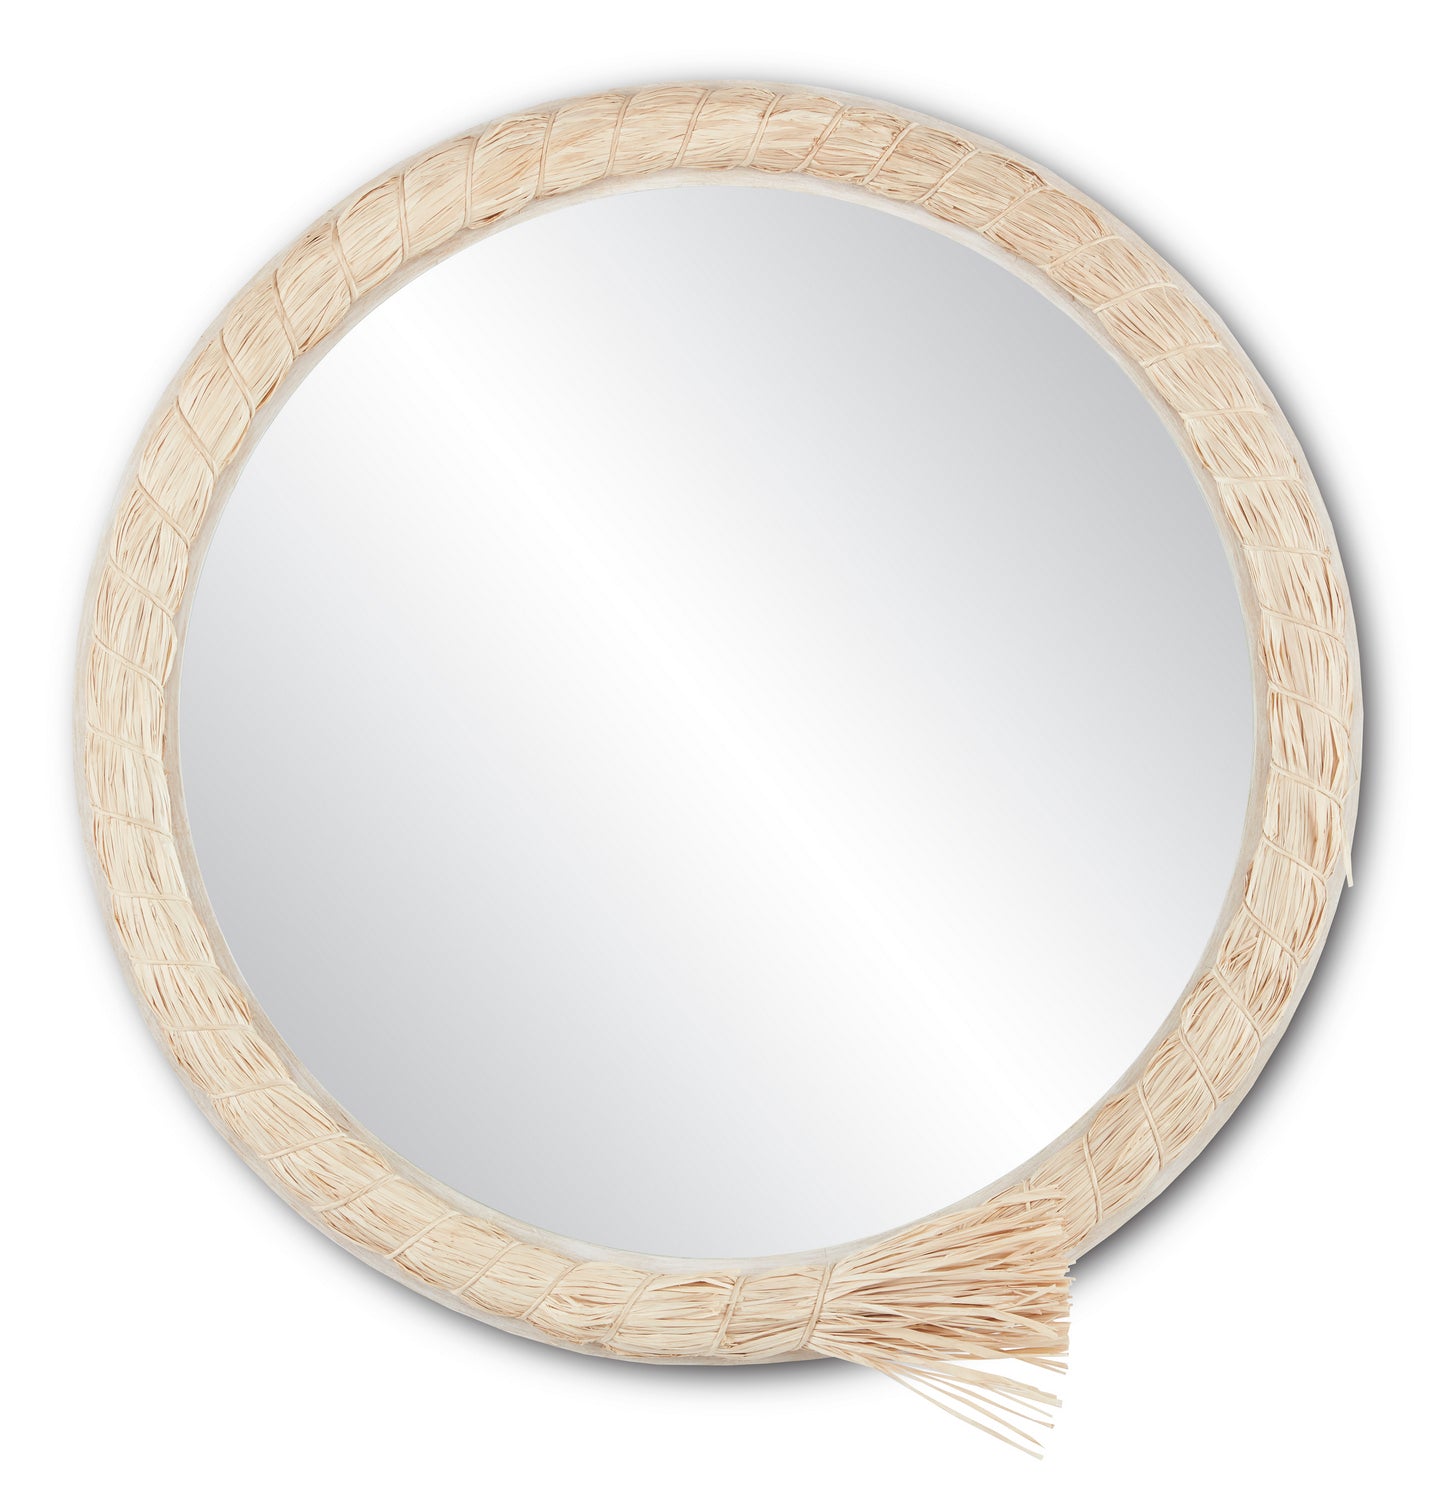 Mirror from the Jamie Beckwith collection in Natural Raffia/Mirror finish